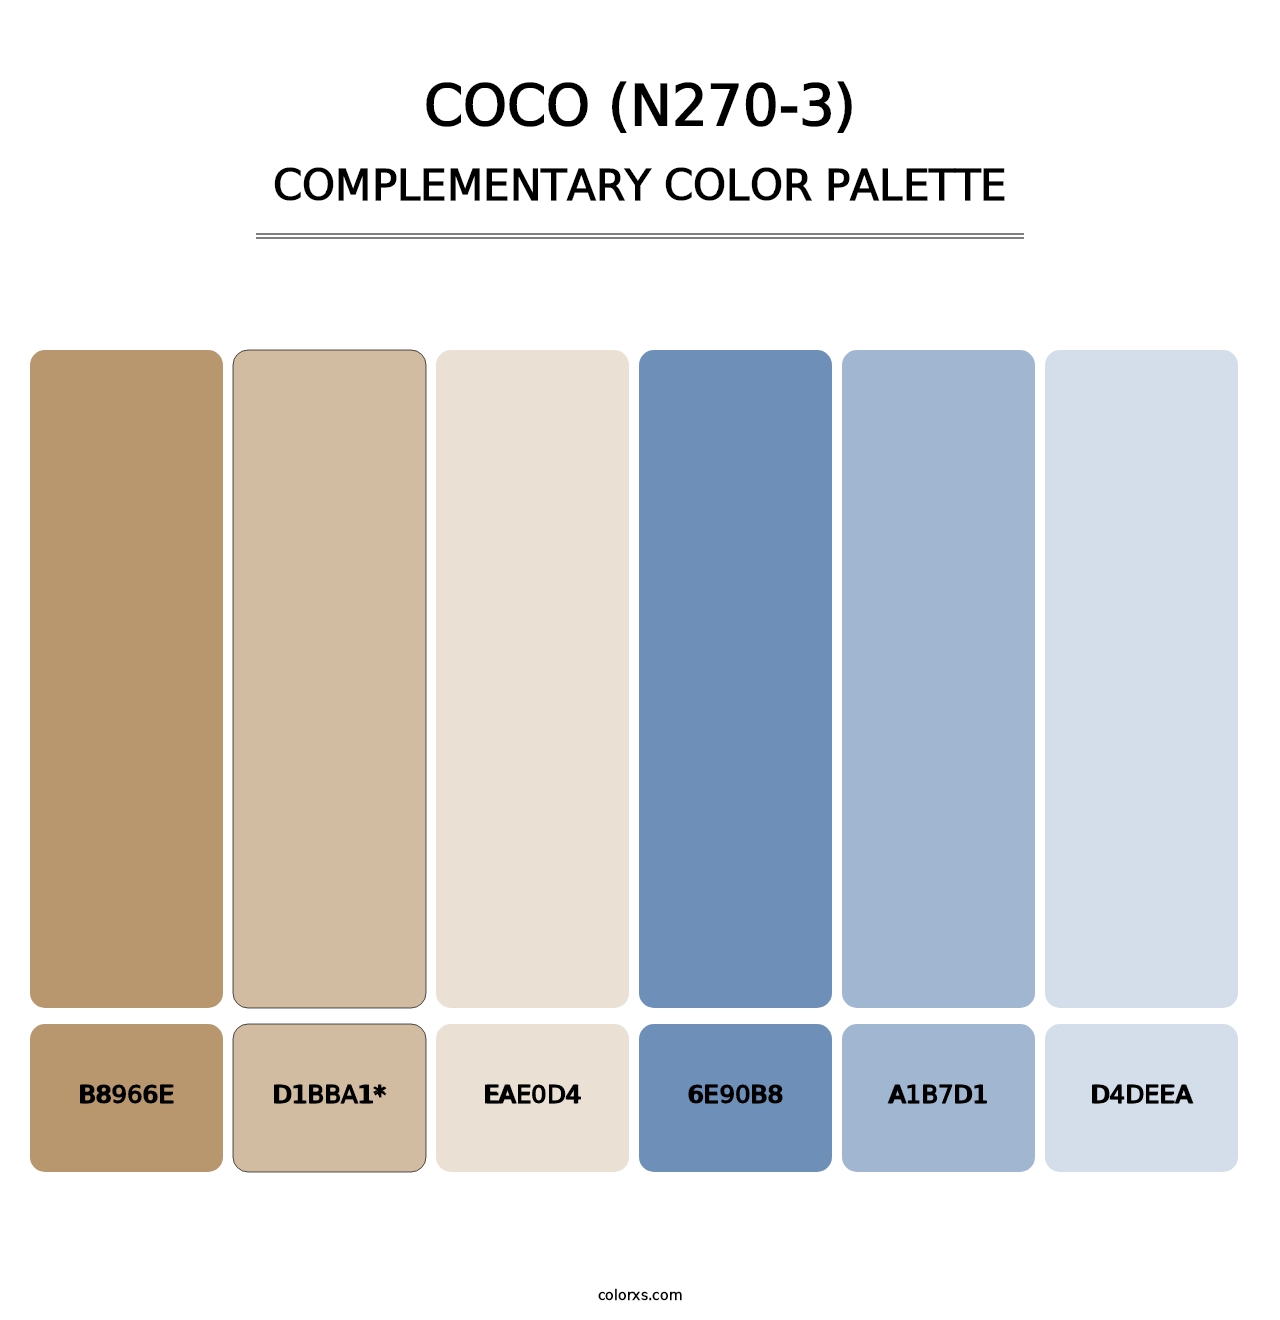 Coco (N270-3) - Complementary Color Palette